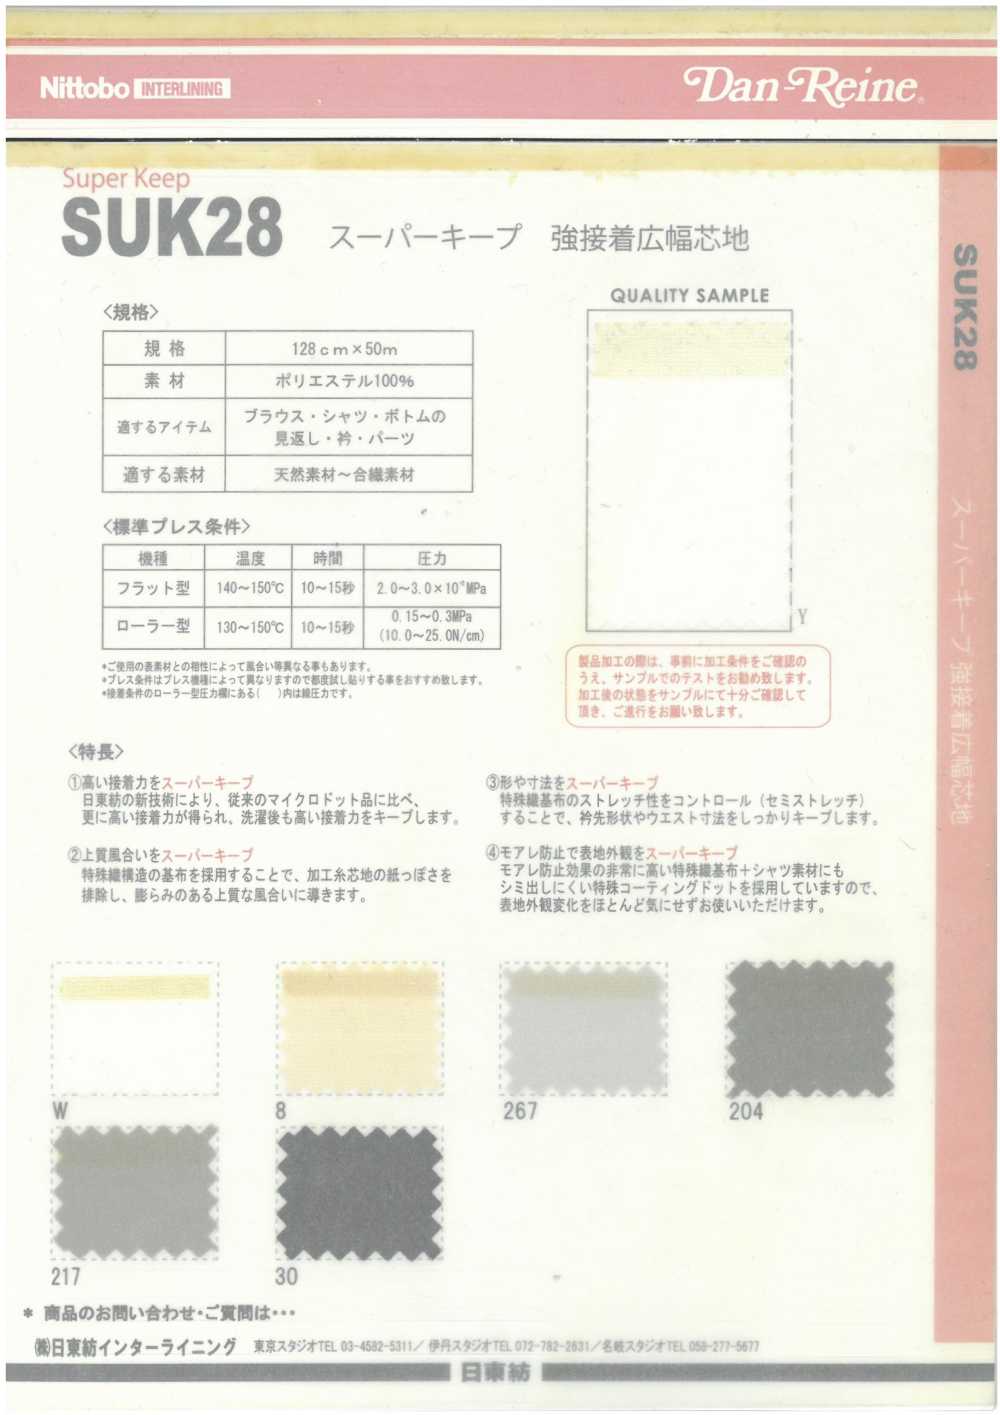 SUK28 Super Keep Strongly Adhesive Wide Width Interlining Nittobo